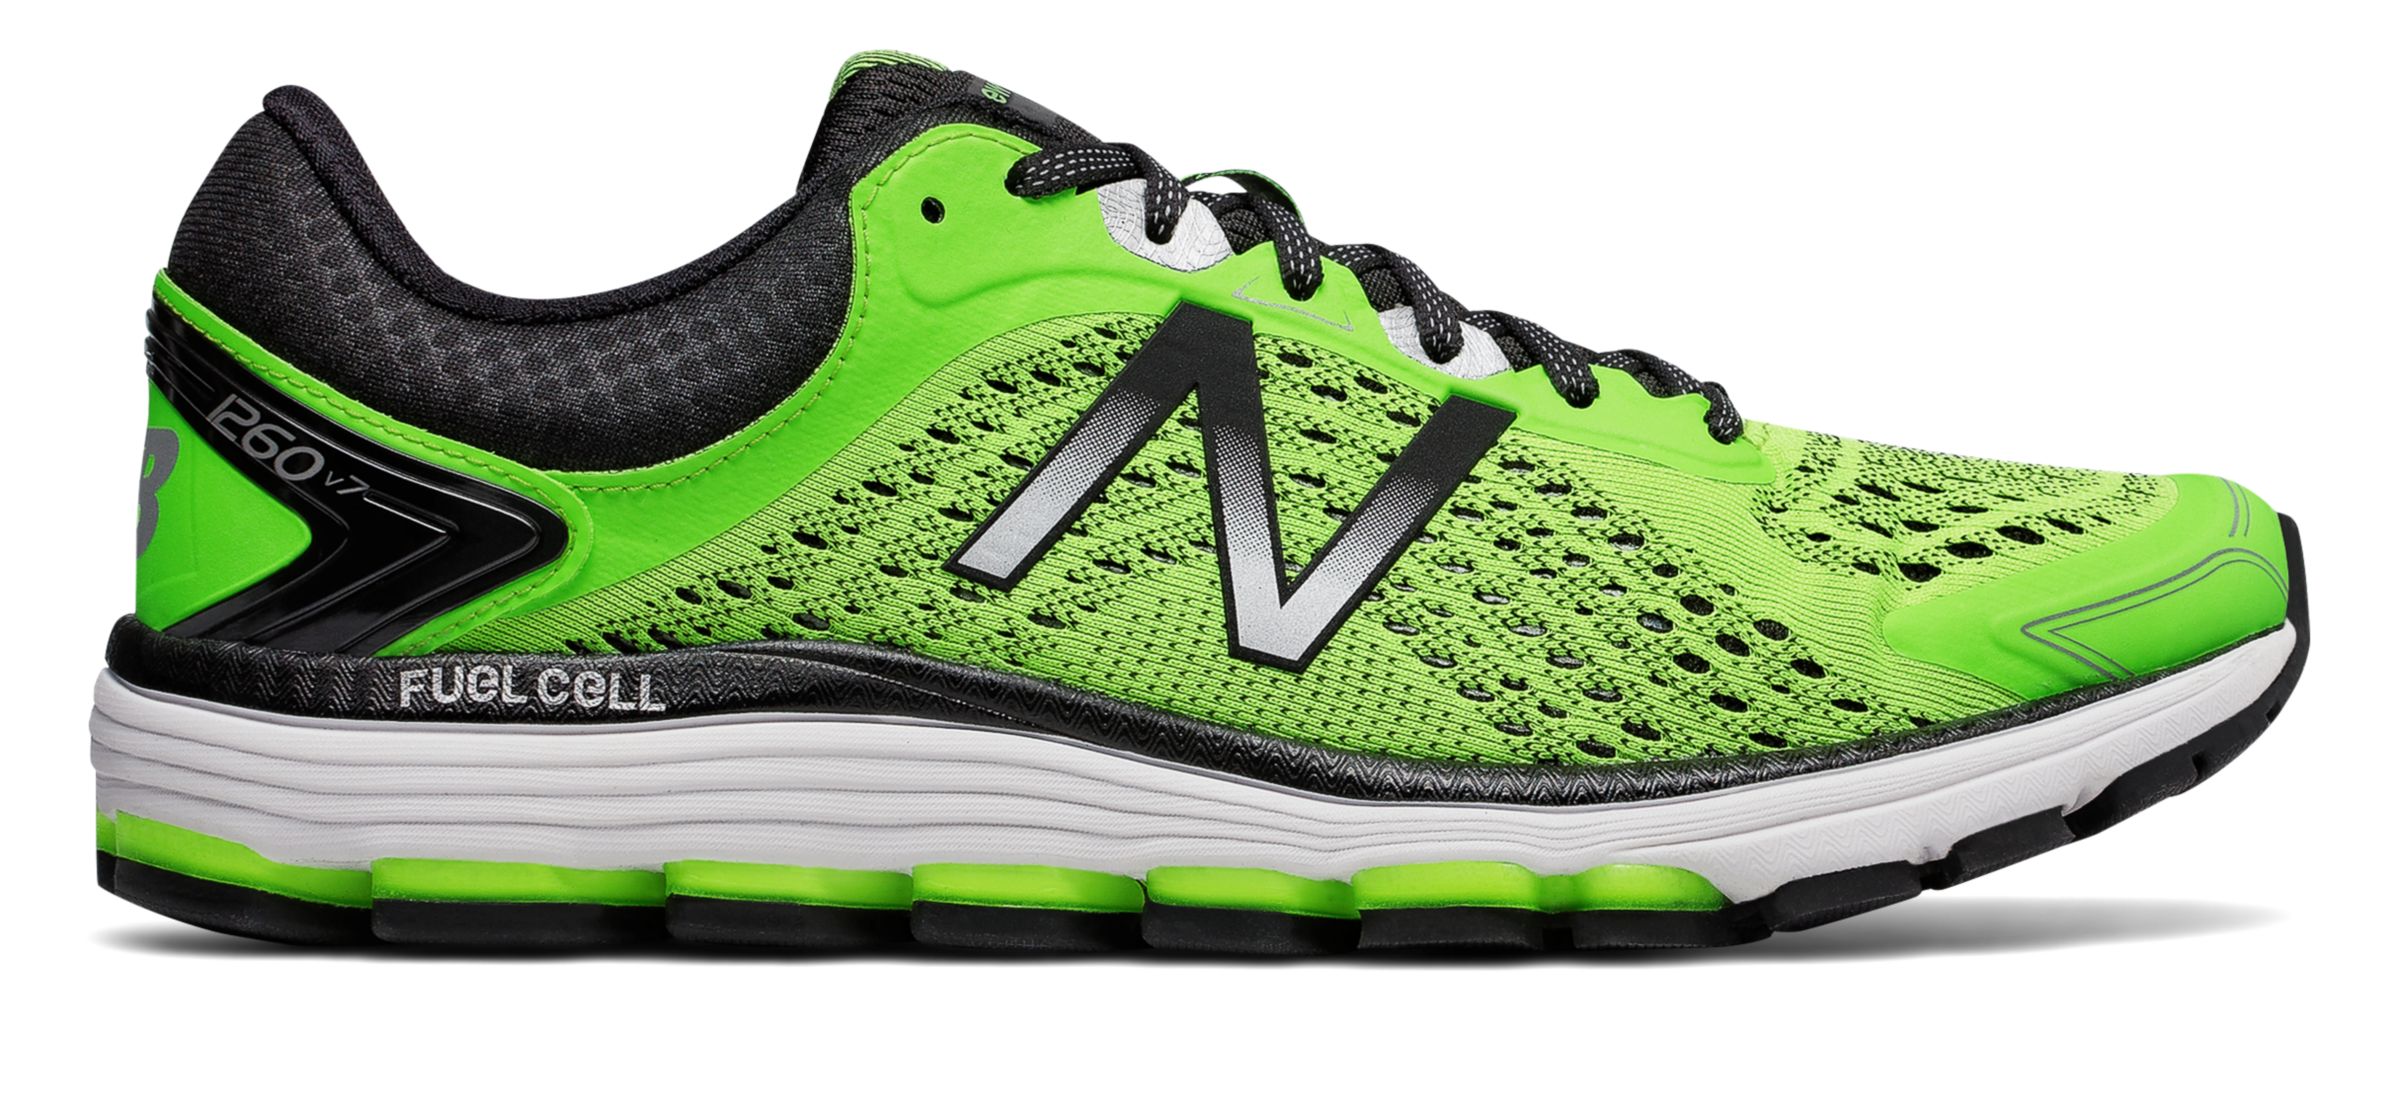 New Balance M1260-V7 on Sale - Discounts Up to 54% Off on M1260GB7 at Joe's New  Balance Outlet